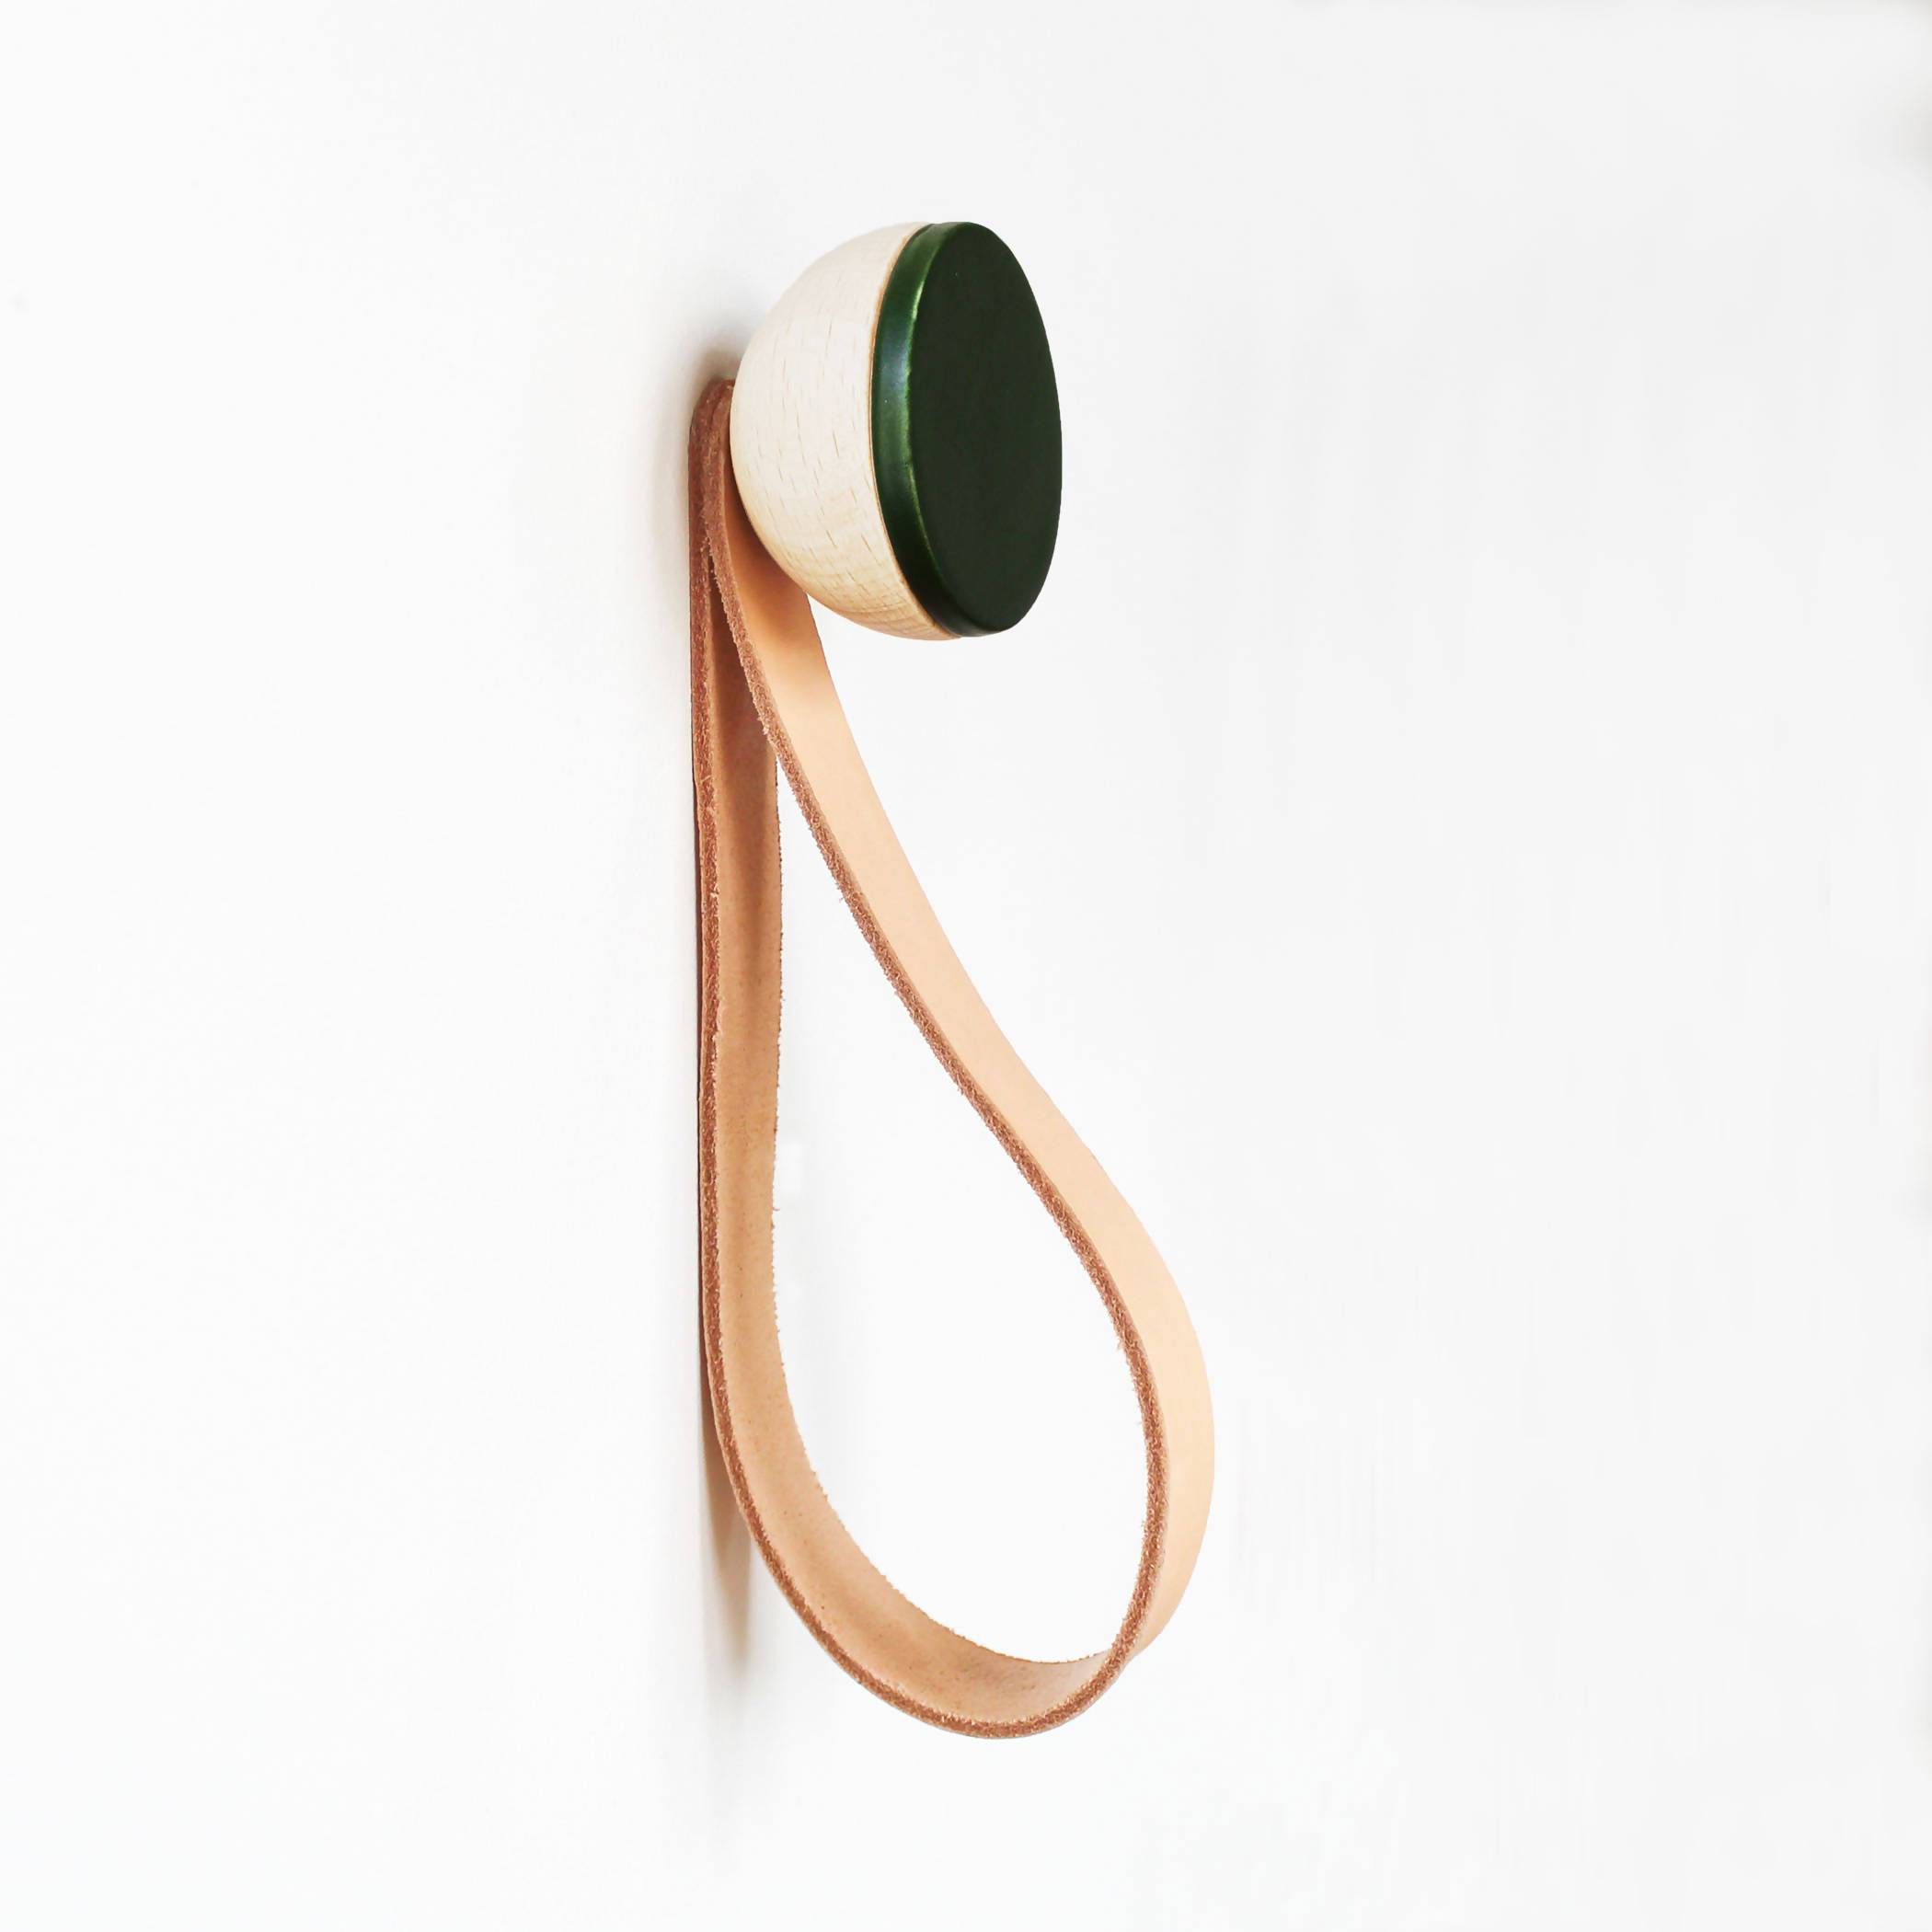 Round Beech Wood & Ceramic Wall Mounted Coat Hook / Hanger with Leather Strap - Dark Green Home Decor 5mm Paper Diameter 5cm 